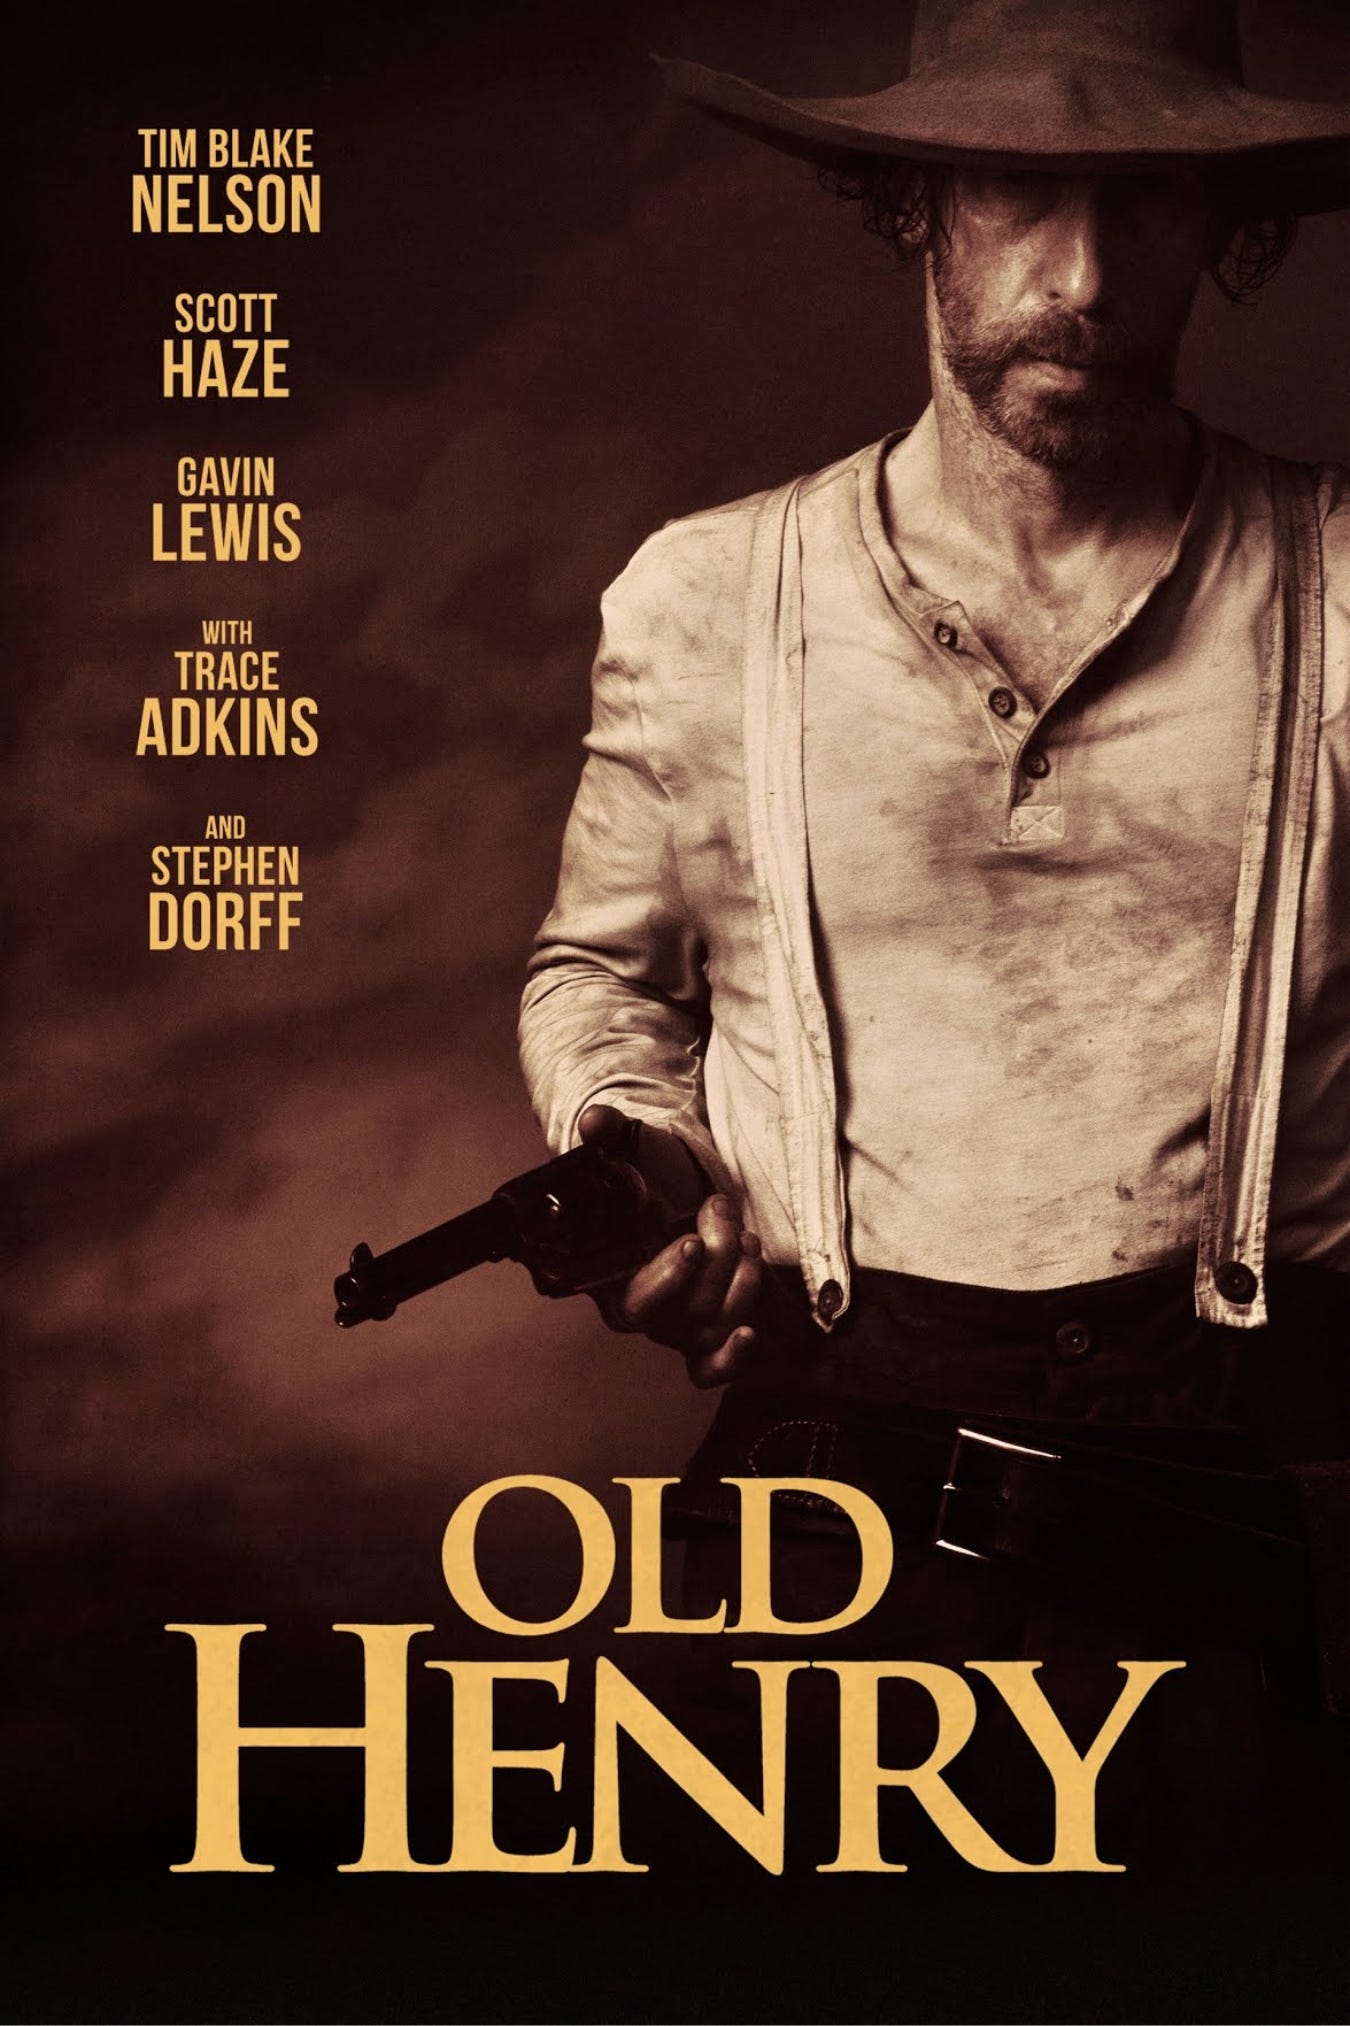 OLD HENRY poster 2 – My Favorite Westerns